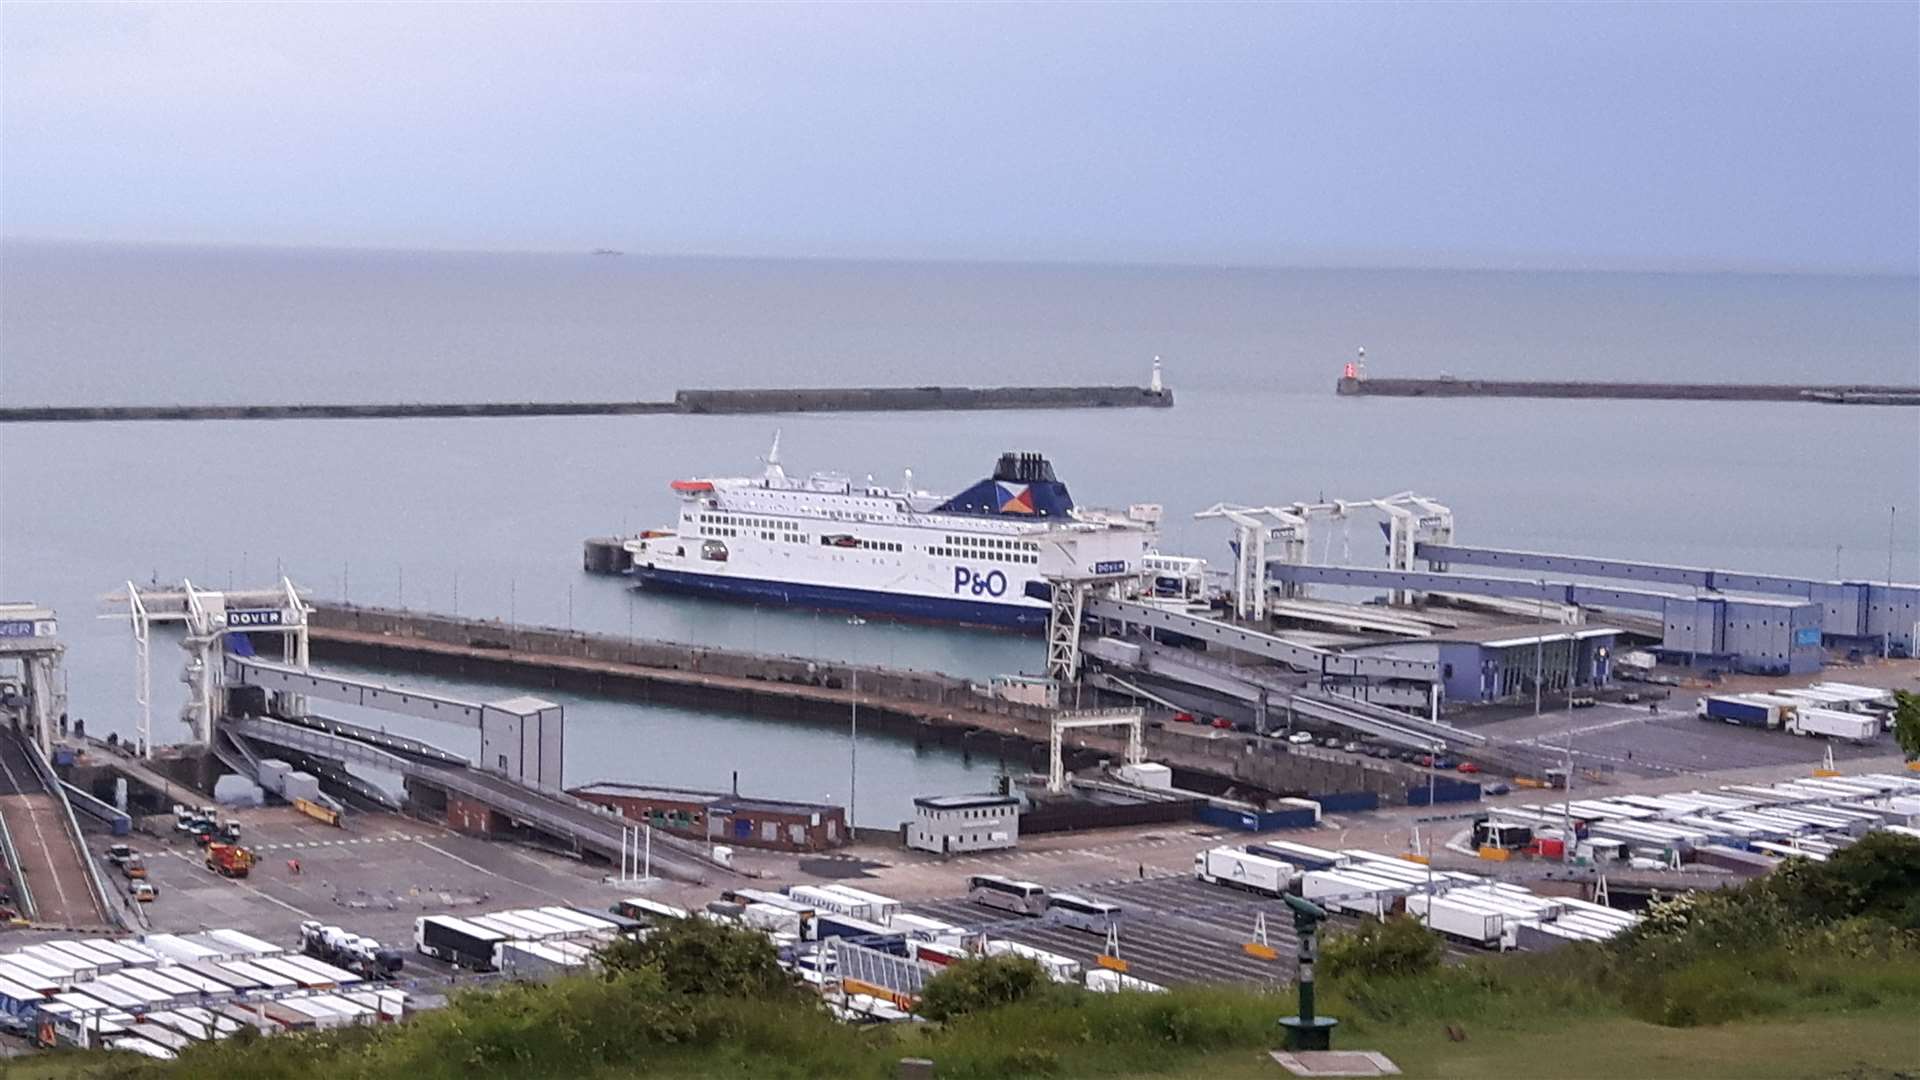 Only three P&O ships will sail from Dover in a slimmed down operation brought about by Coronavirus